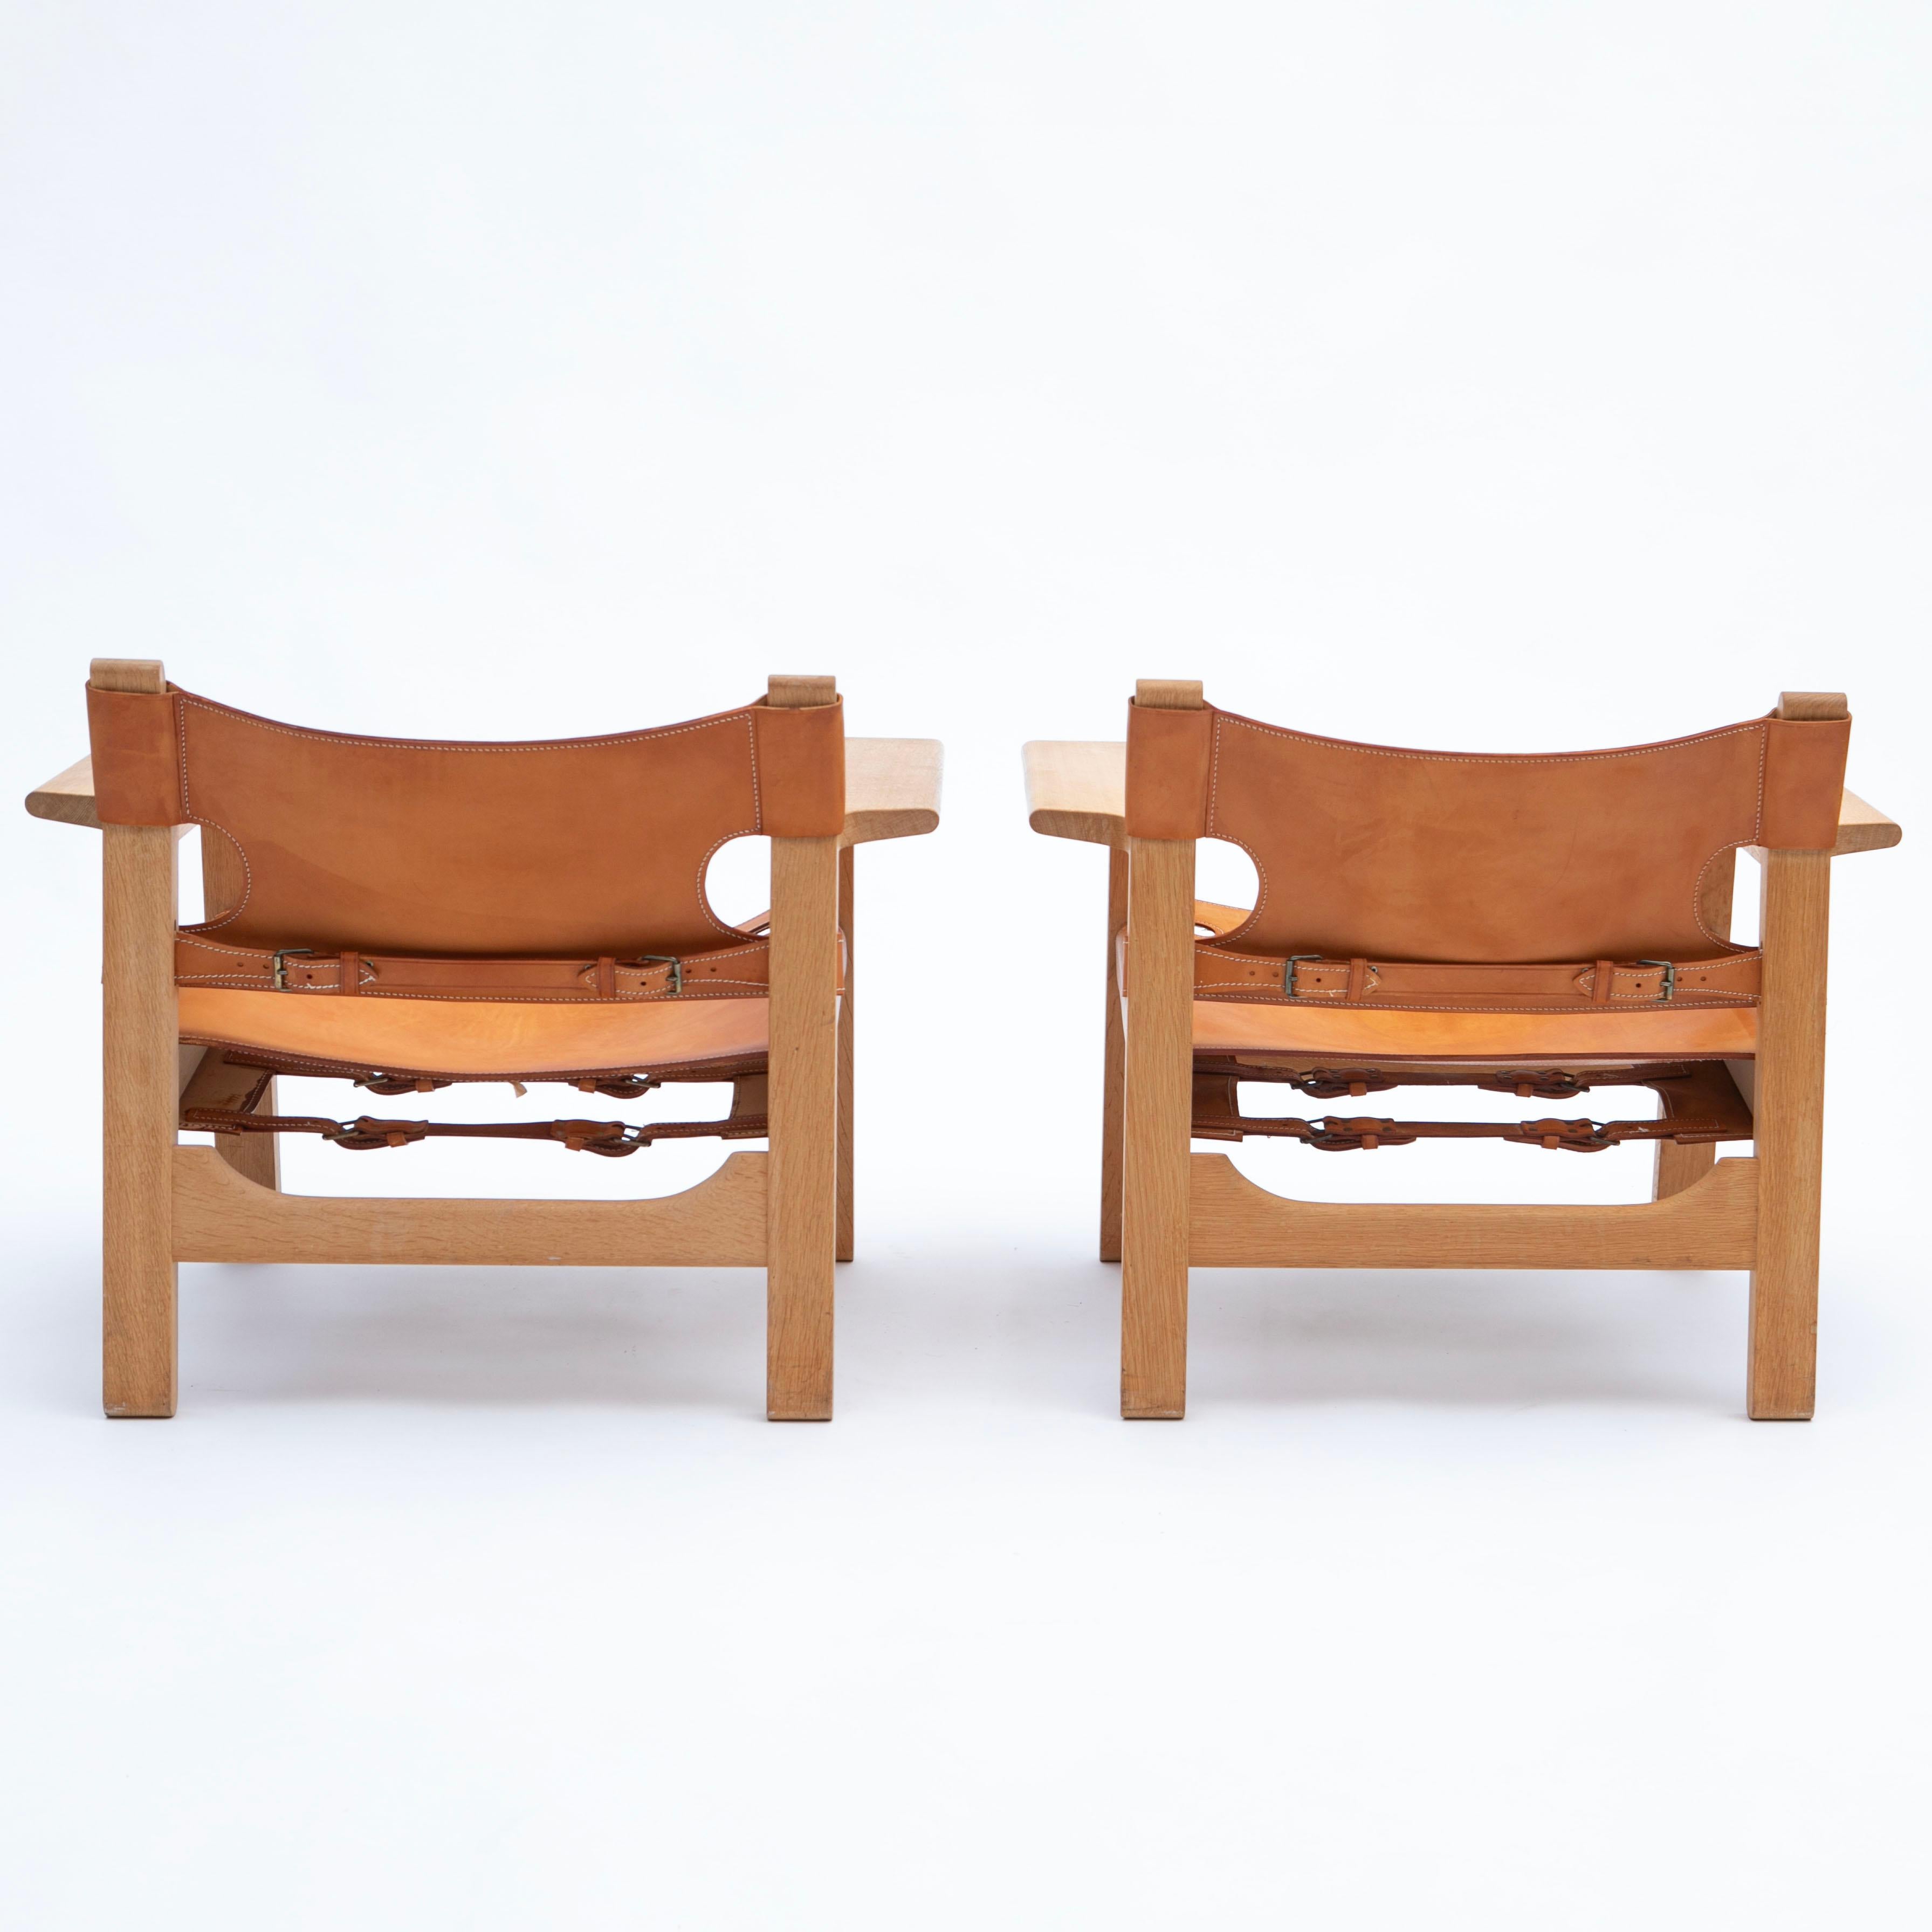 A pair of 'The Spanish Chair', model 2226.
Designed by Børge Mogensen in 1958 for Fredericia Furniture.
Made of solid oak with light saddle leather. Original untouched condition with natural patina.

Price is for a pair (2) !